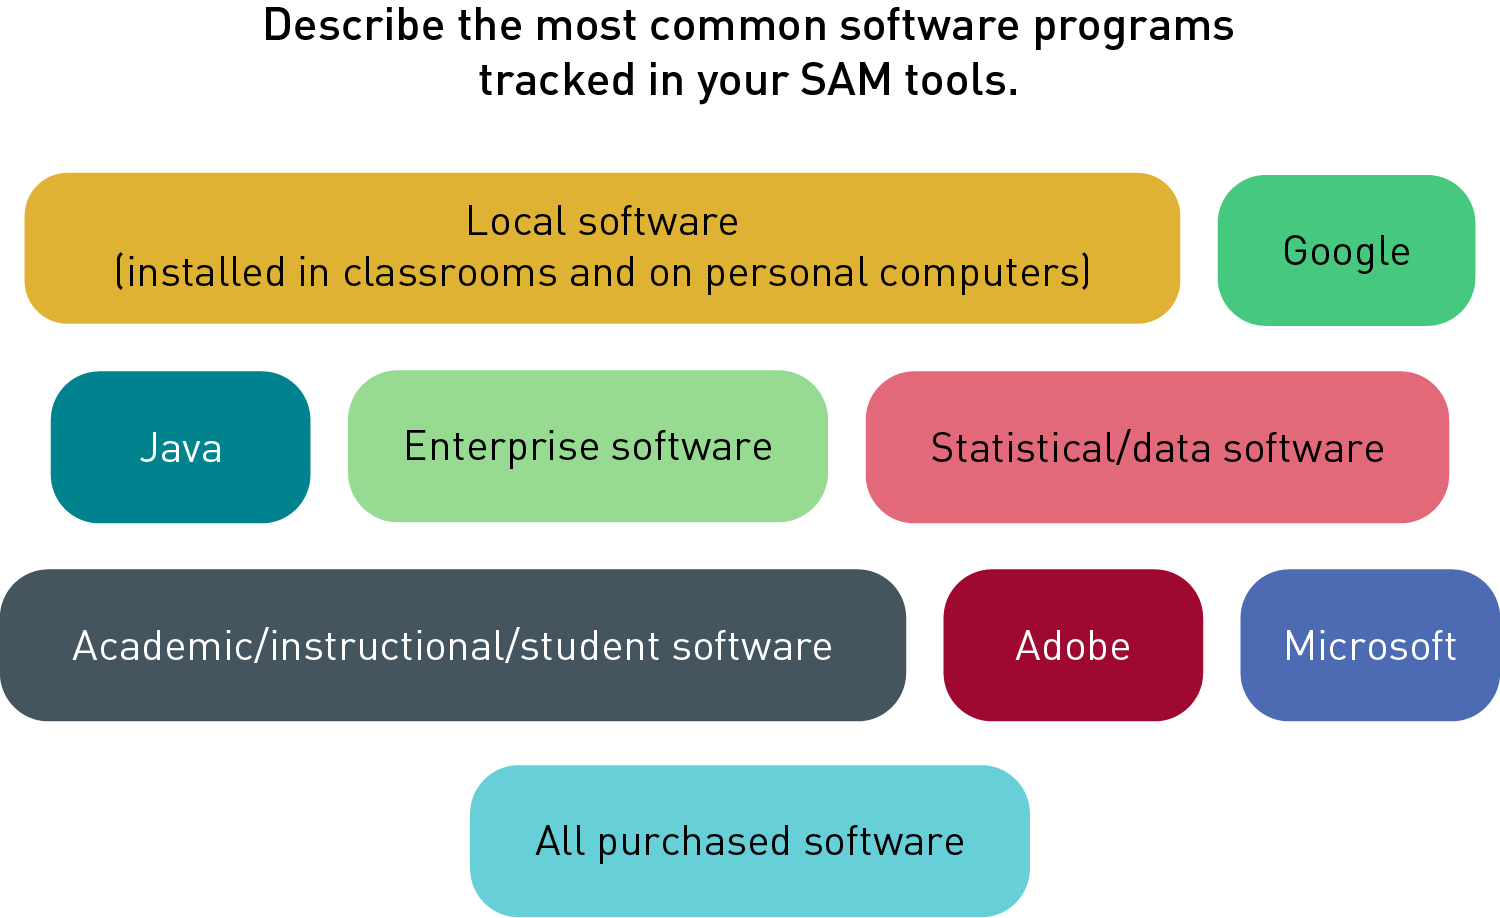 Chart showing text responses for the software programs most commonly tracked in SAM tools: Local software, Google, Java, Enterprise software, Statistical/data software, Academic/instructional/student software, Adobe, Microsoft, and All purchased software.